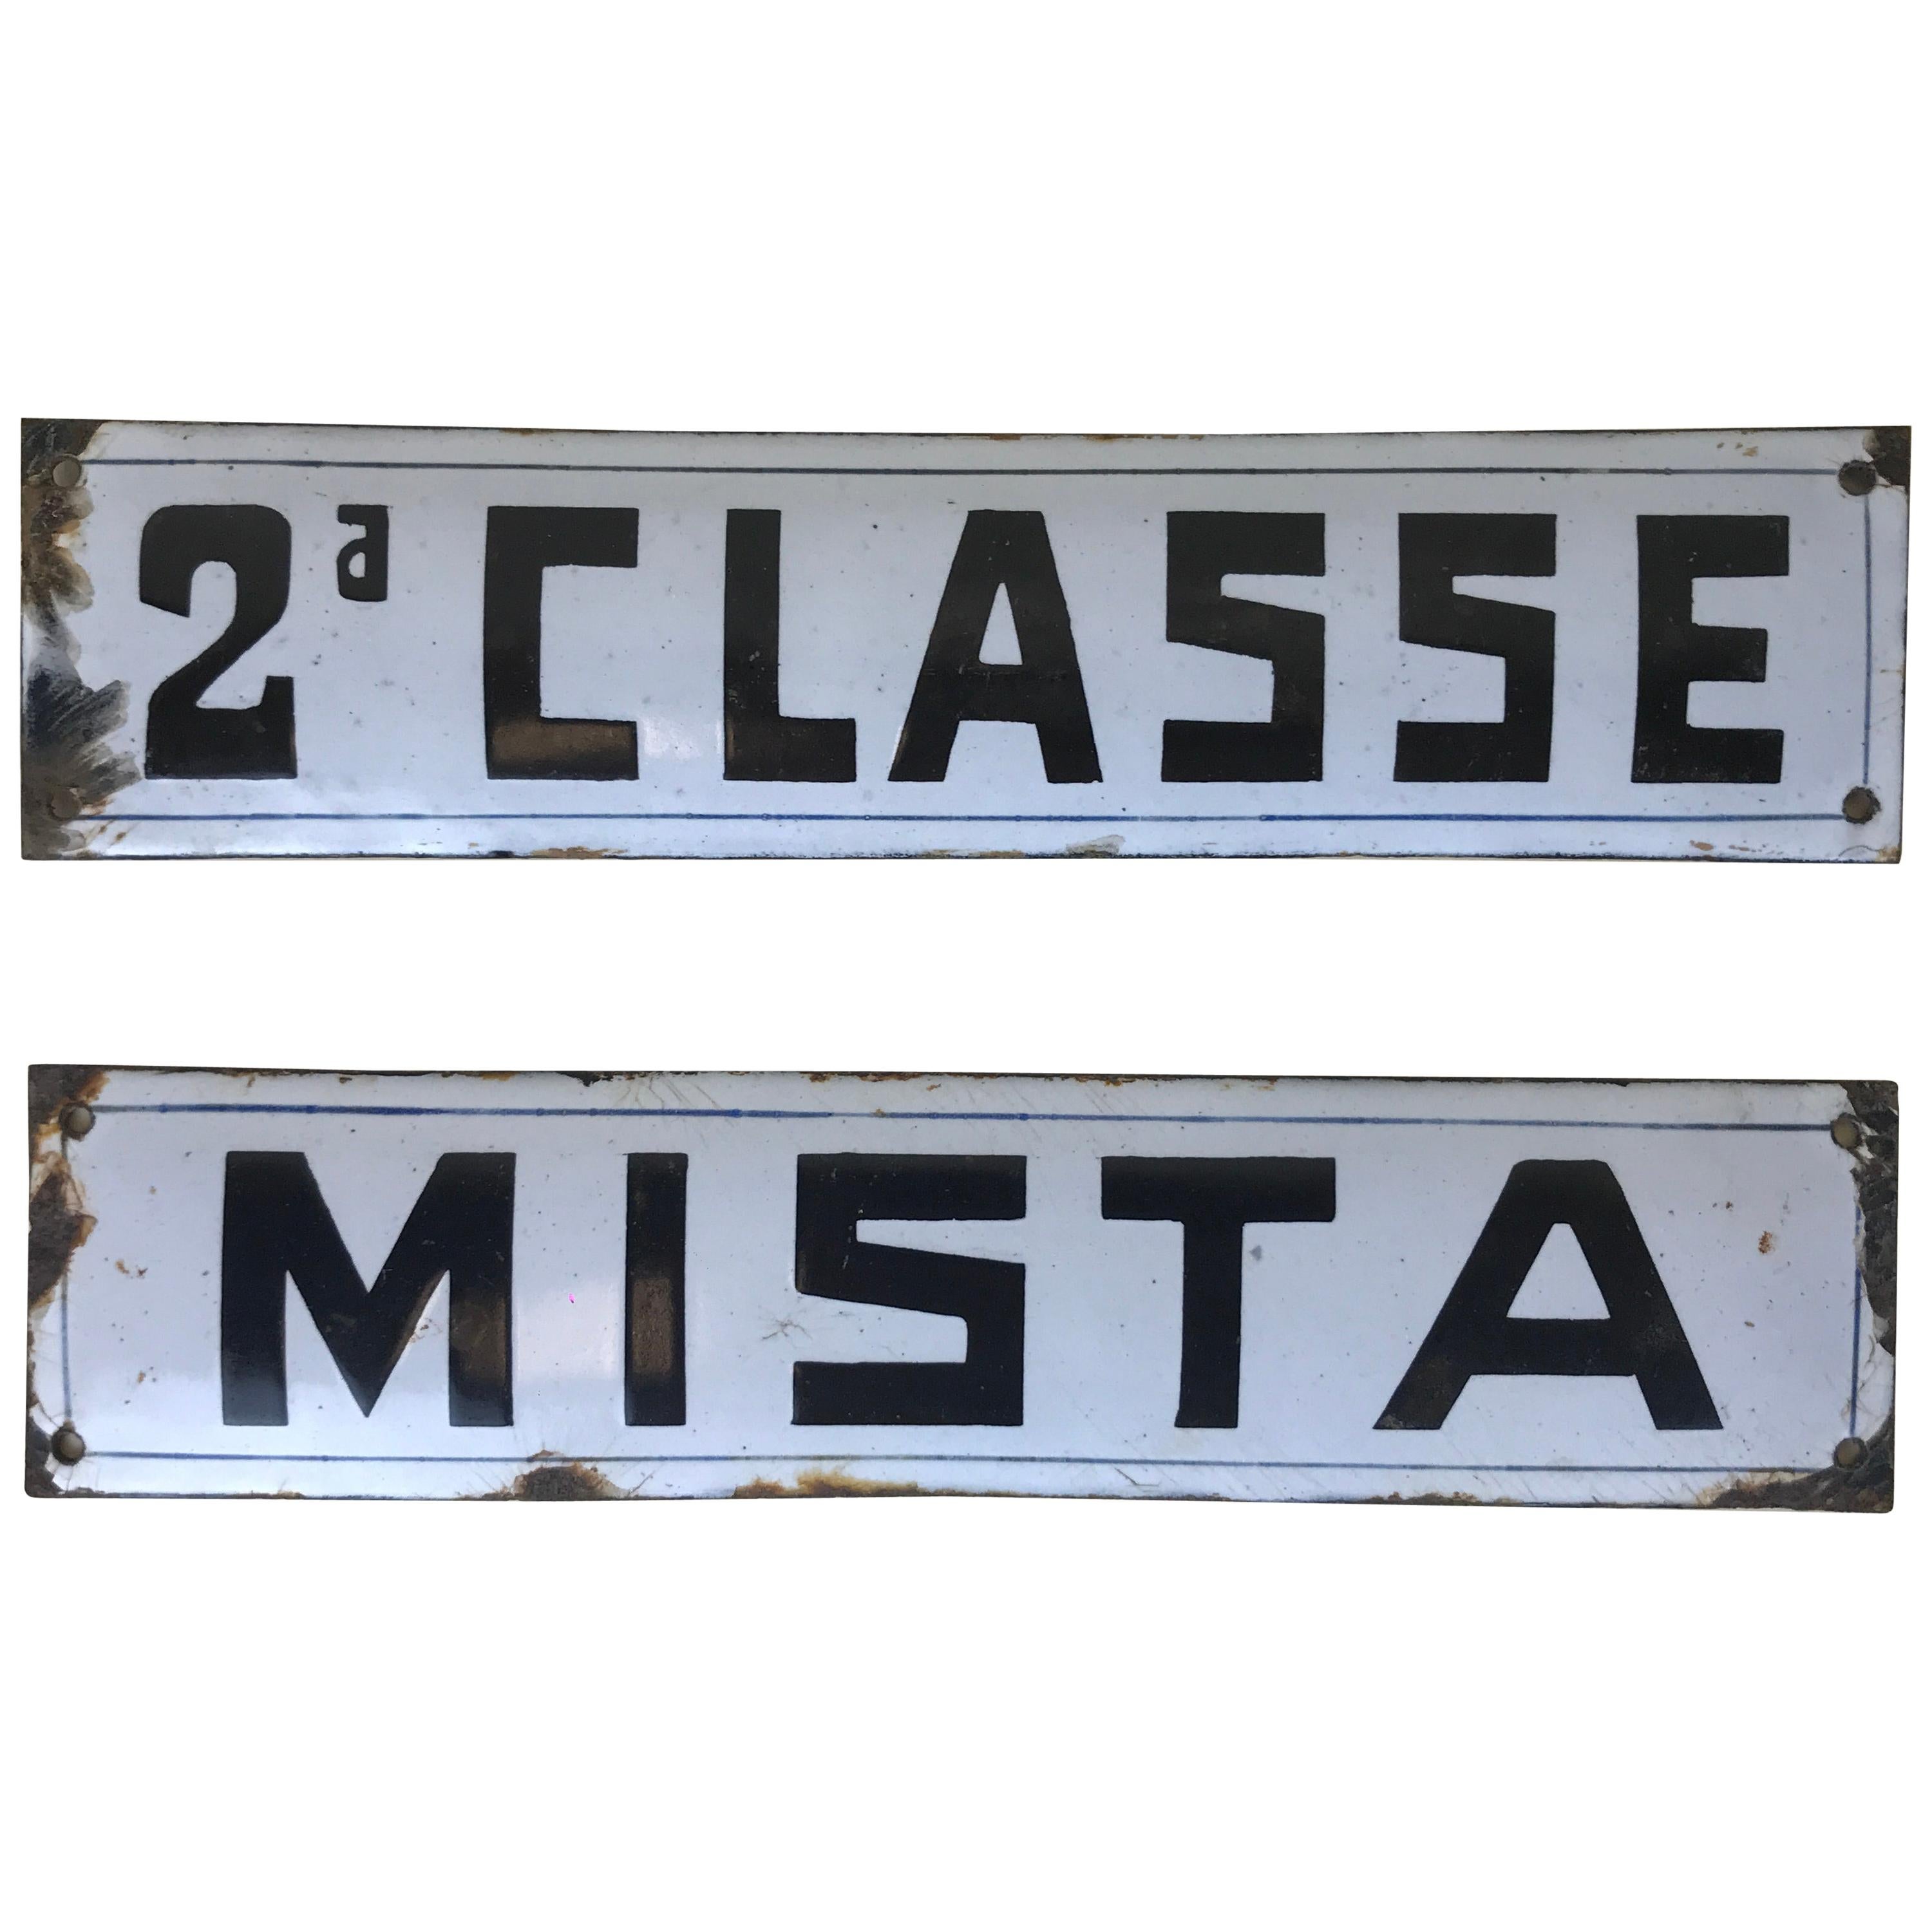 1940s Italian Vintage Set of Enamel Metal Signs "Second Class" and "Mixed Class" For Sale